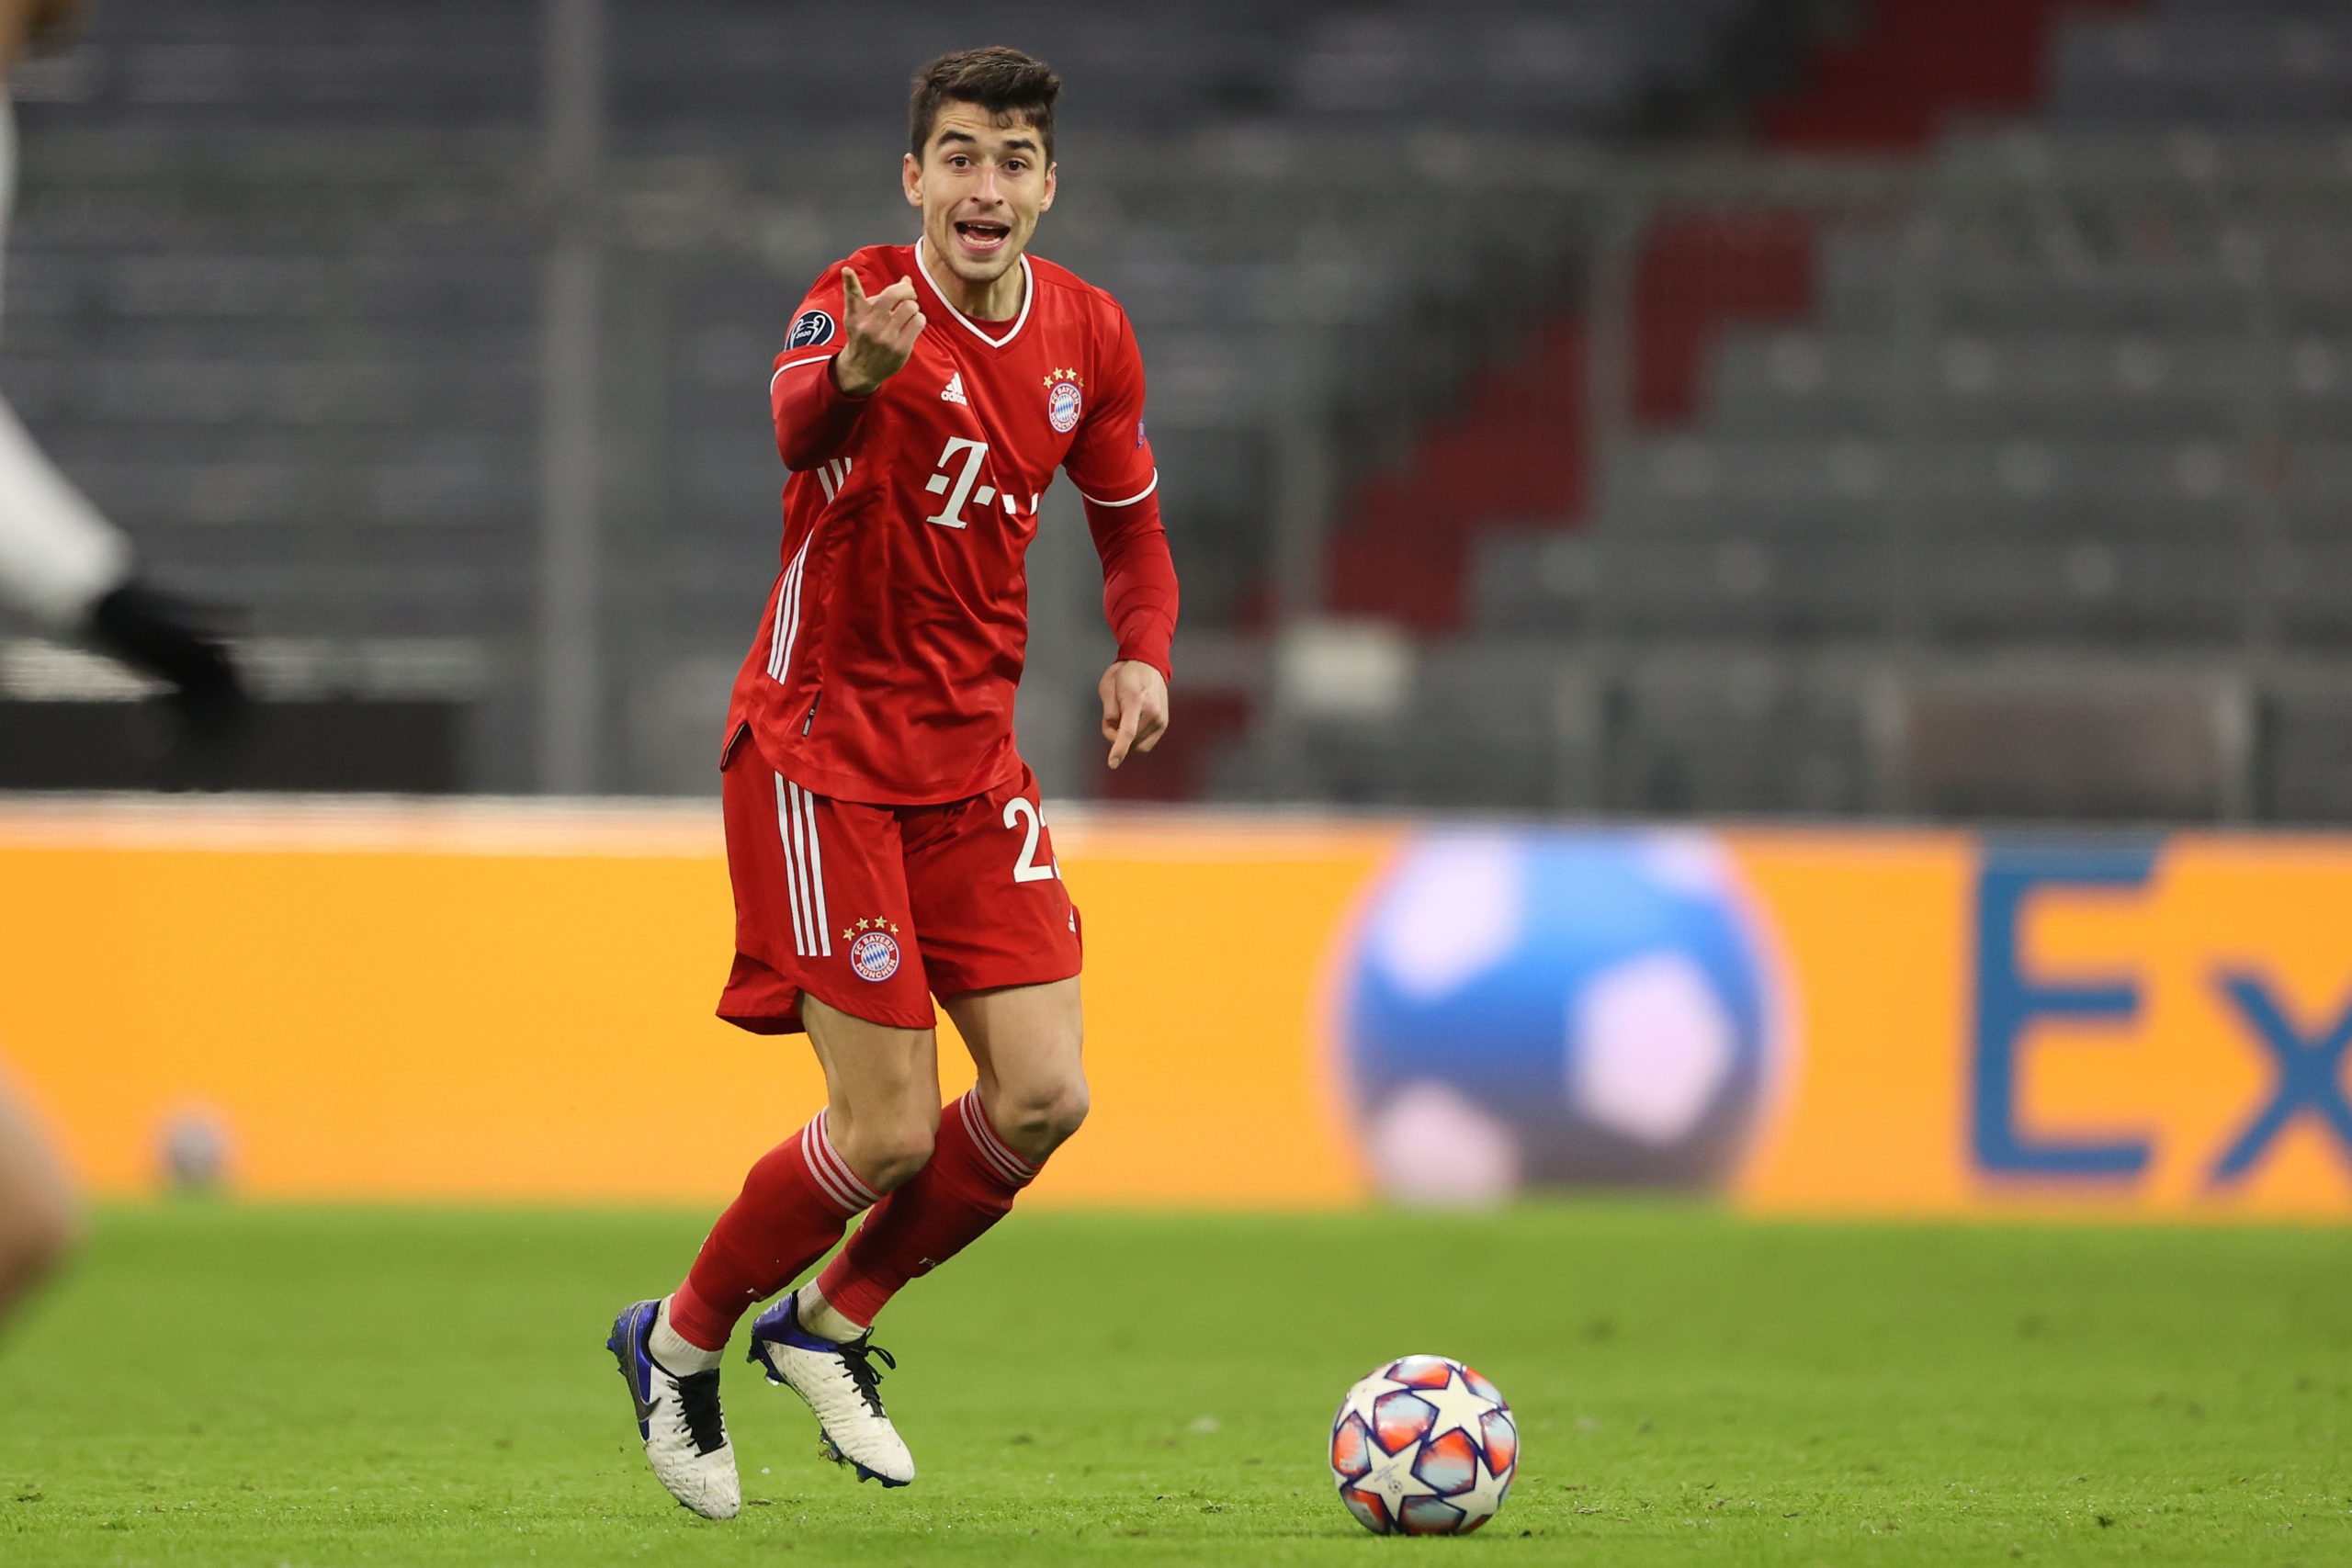 MUNICH, GERMANY - DECEMBER 09: Marc Roca of FC Bayern München runs with the ball during the UEFA Champions League Group A stage match between FC Bayern Muenchen and Lokomotiv Moskva at Allianz Arena on December 09, 2020 in Munich, Germany. (Photo by Alexander Hassenstein/Getty Images)The 4th Official uses images provided by the following image agency: Getty Images (https://www.gettyimages.de/) Imago Images (https://www.imago-images.de/)